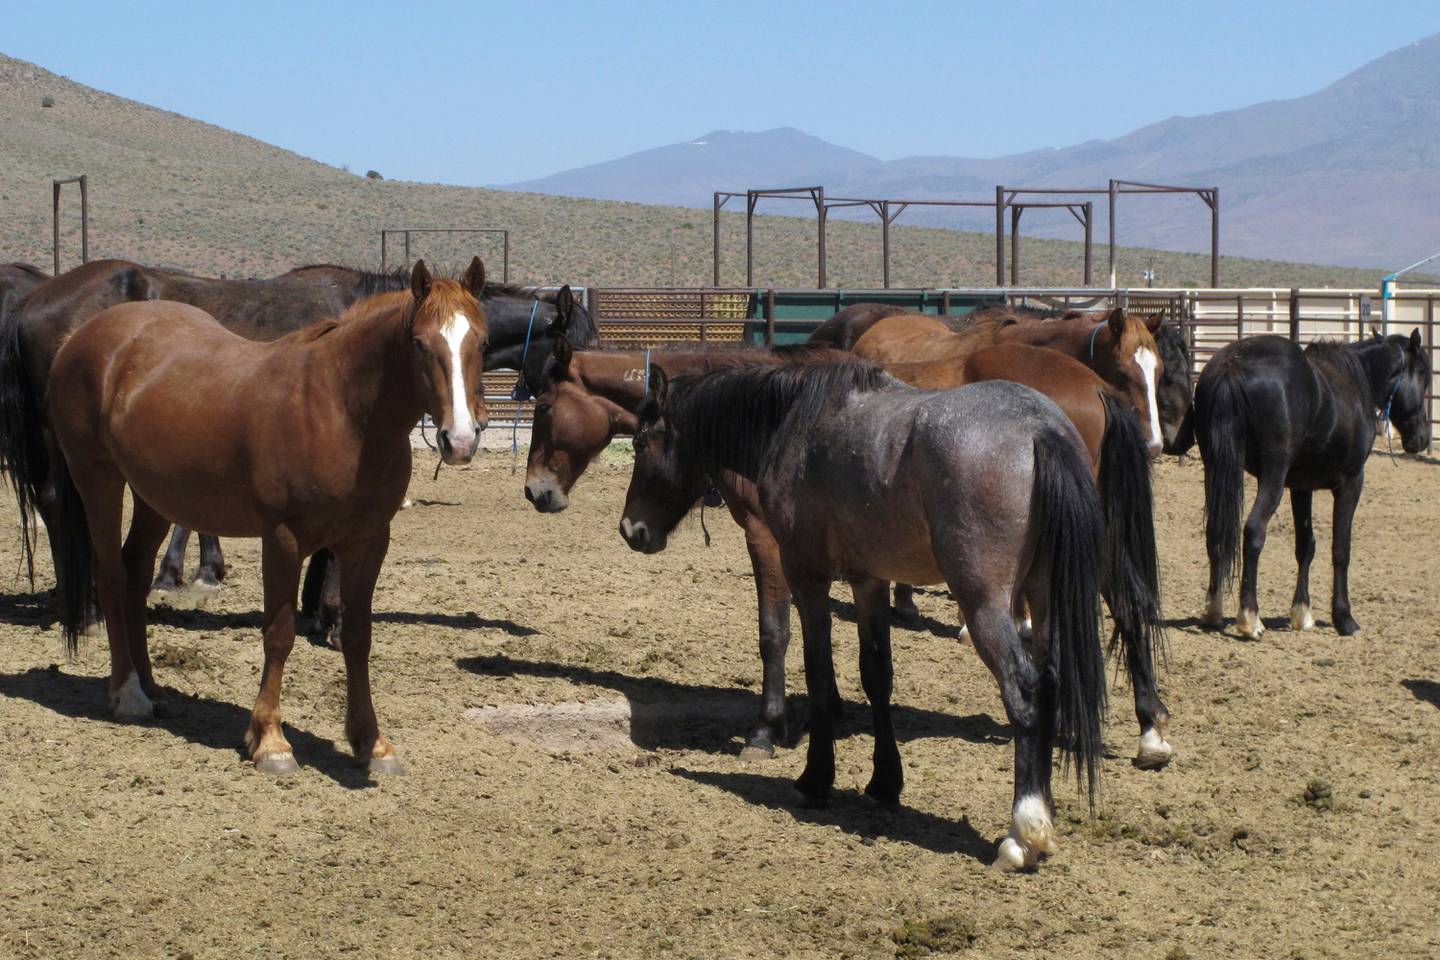 Wild horses that were captured from US rangeland stand in a holding pen near Reno, Nevada. AP